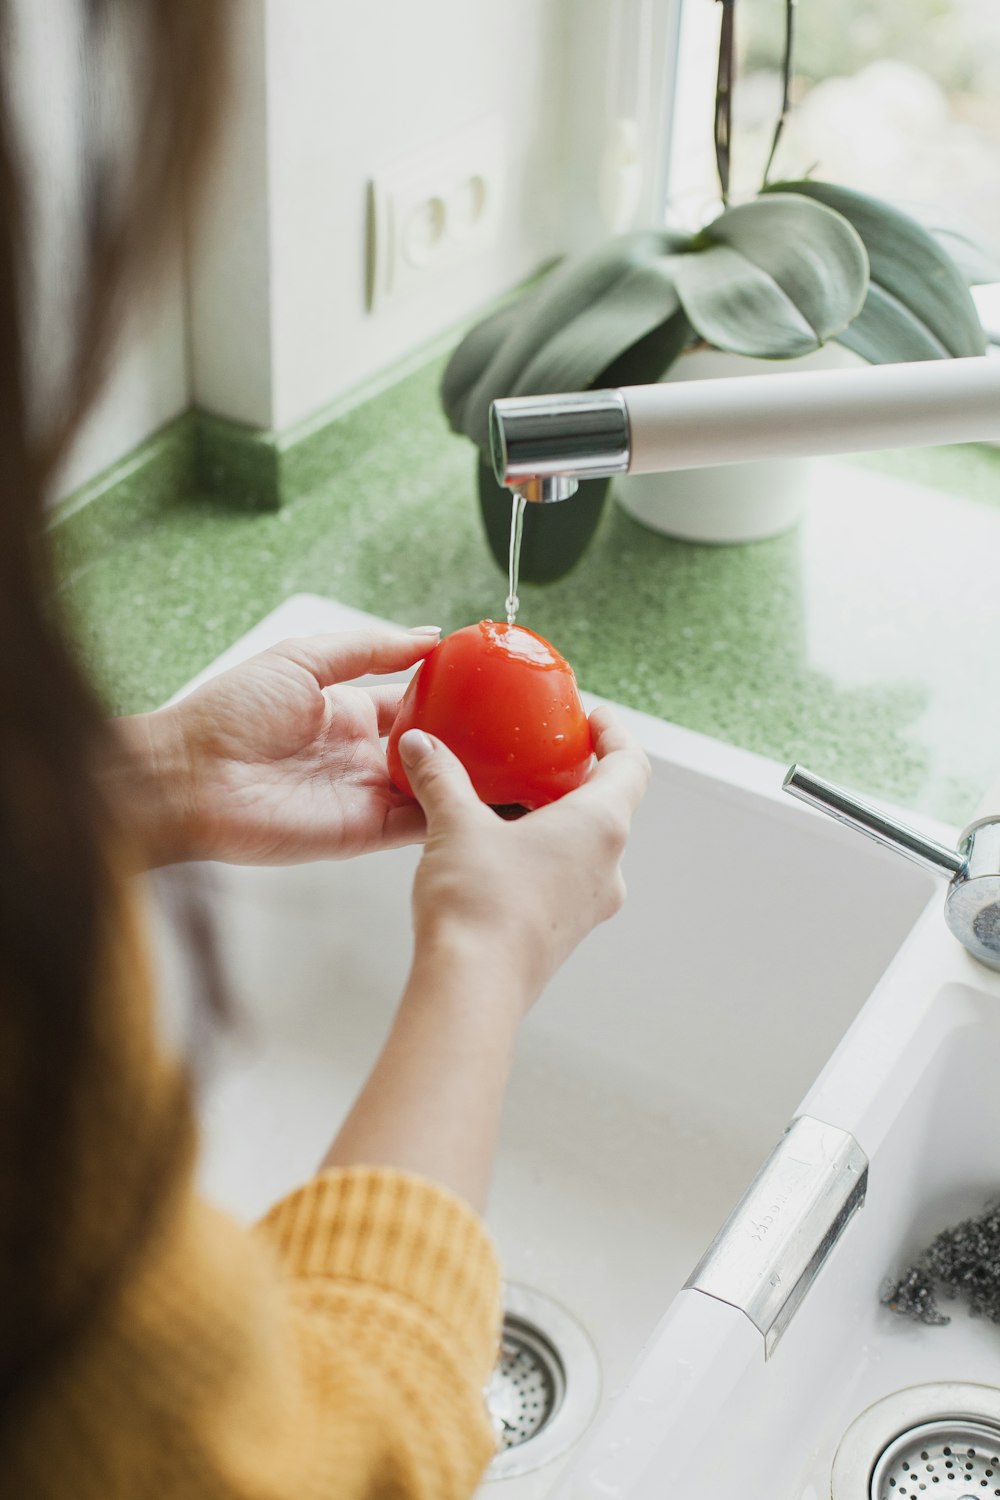 person holding red tomato being washed in faucet